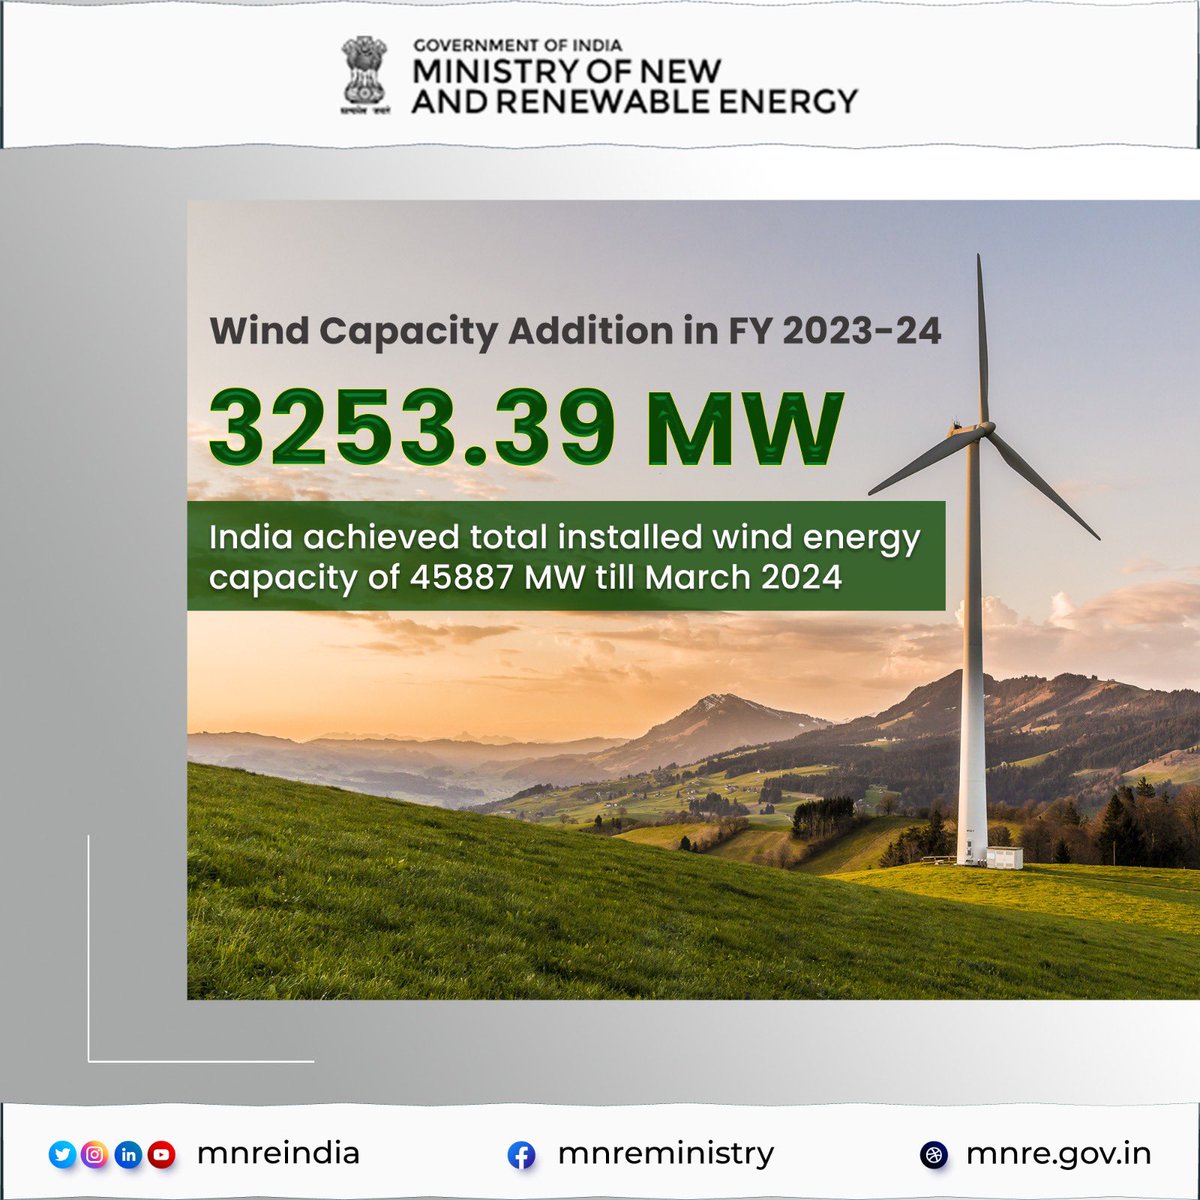 India's wind energy installation surge continues! With a whopping 3253.39 MW added in FY 2023-24, our nation's installed wind capacity now stands strong at 45887 MW. #RenewableEnergy #India #WindPower #MNREIndia